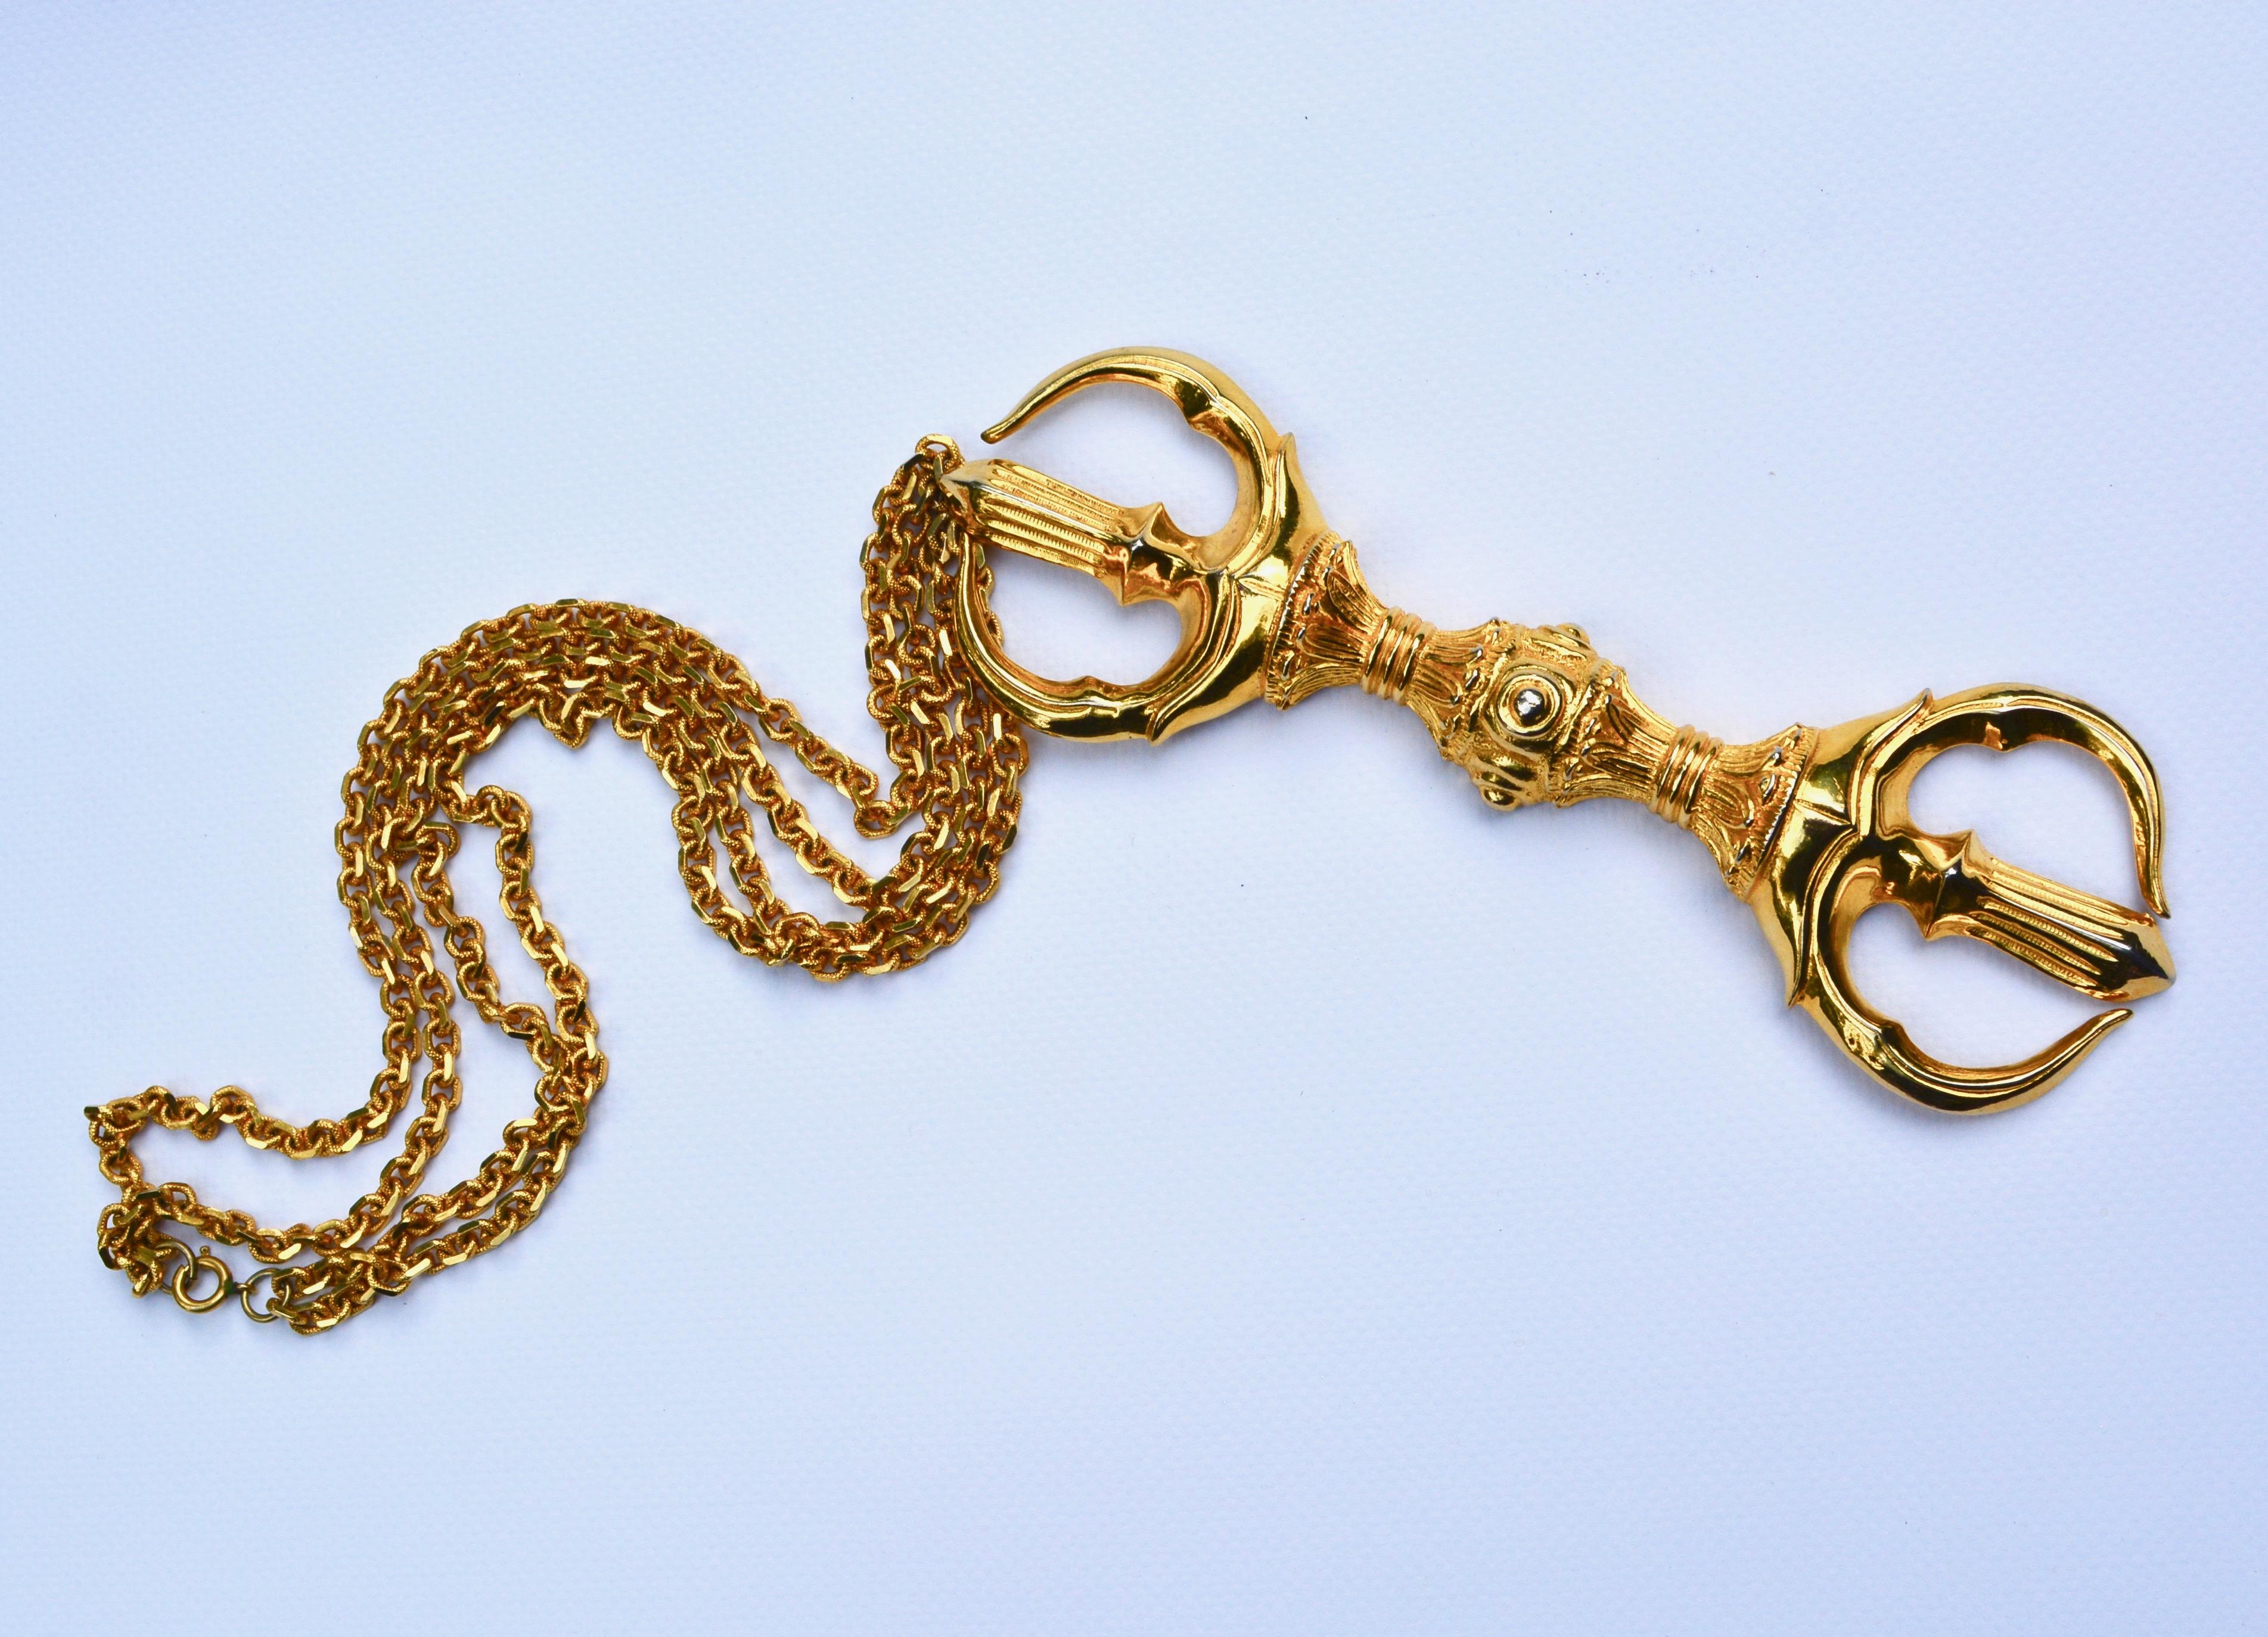 Signed large bohemian style gilt necklace, well constructed details. Double chain design. The pendant is 7